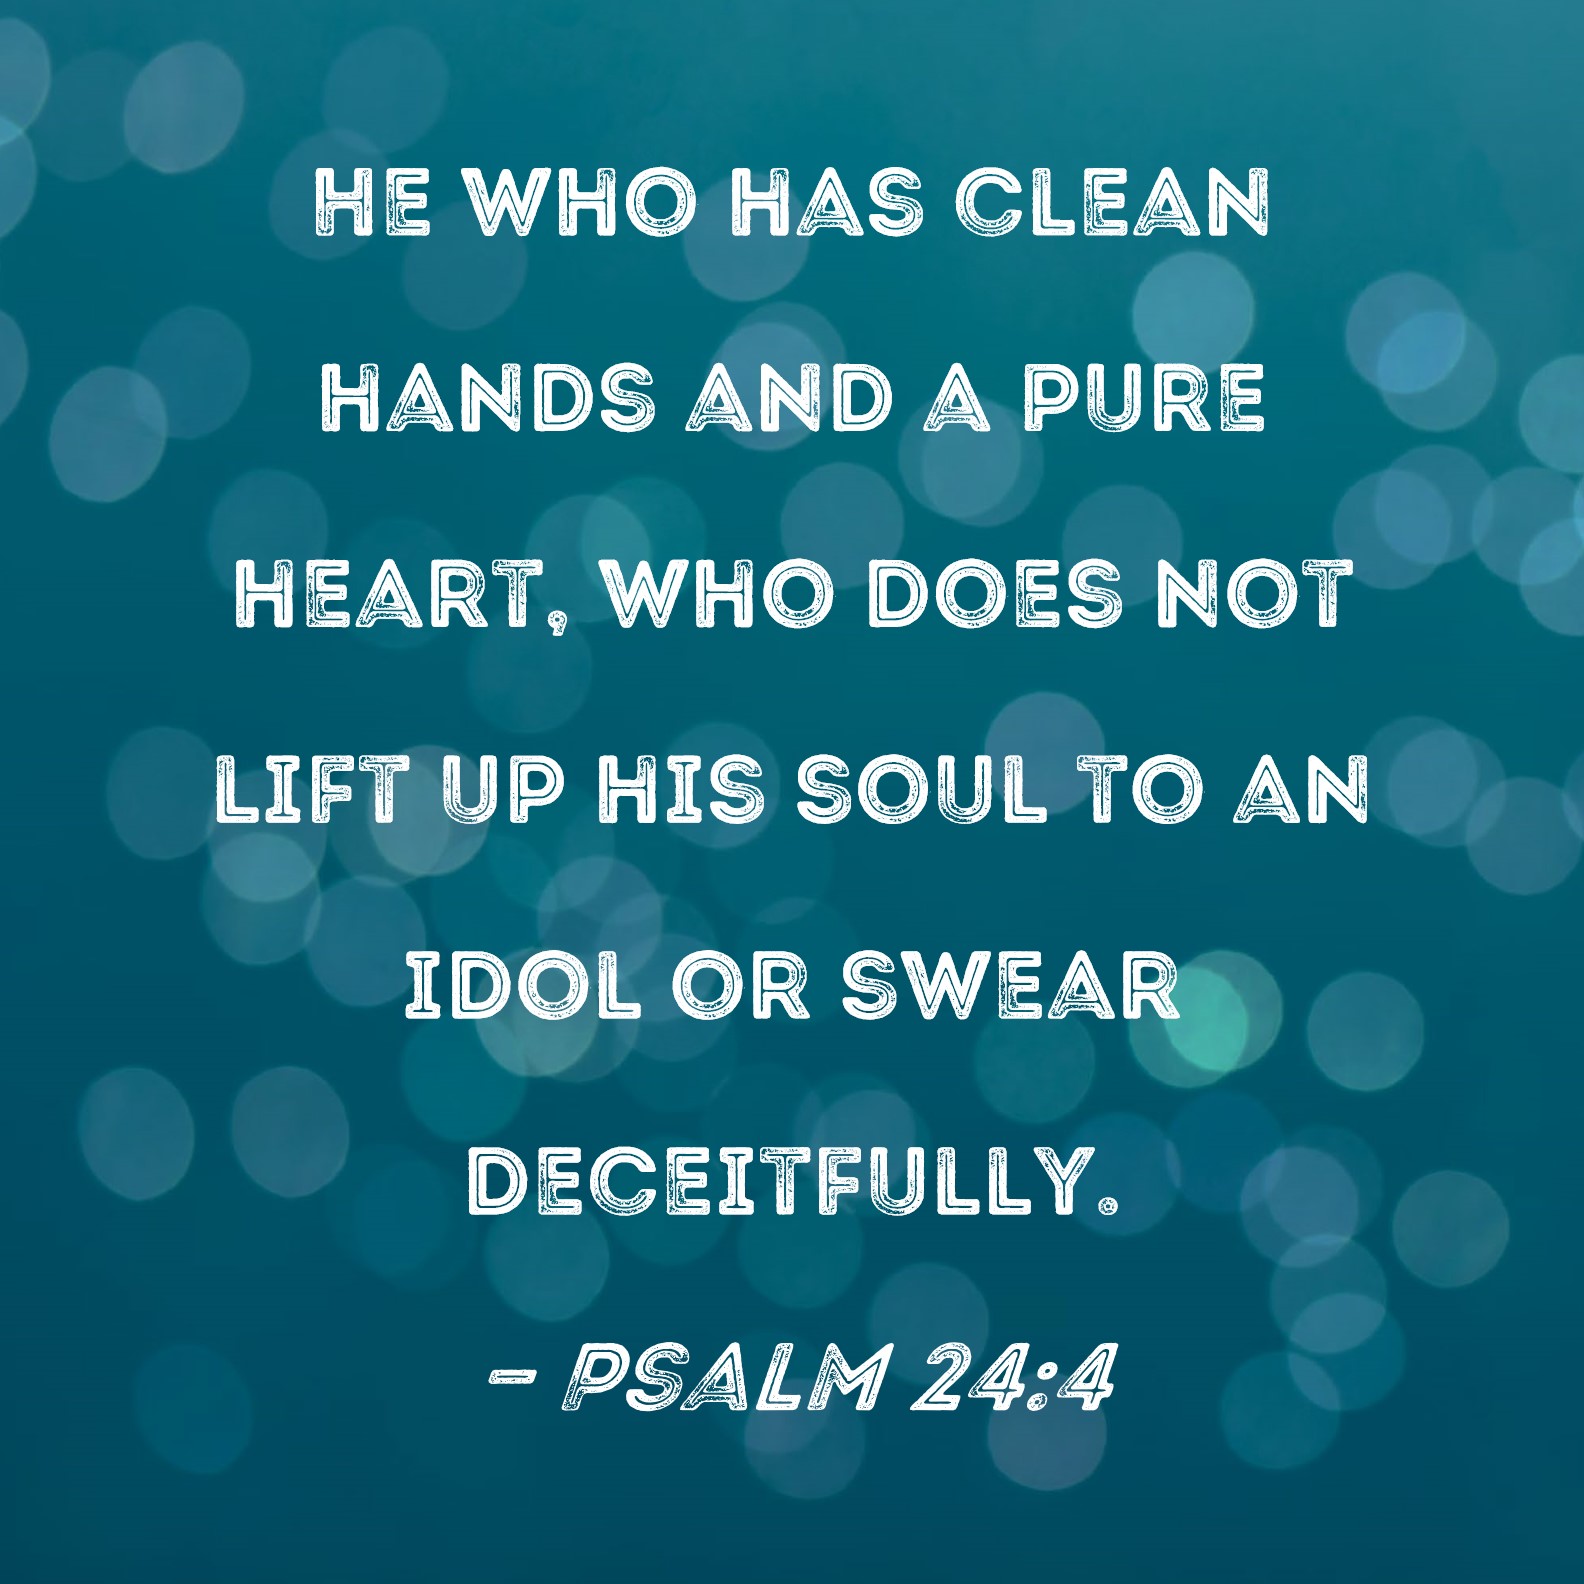 clean hands and pure hearts